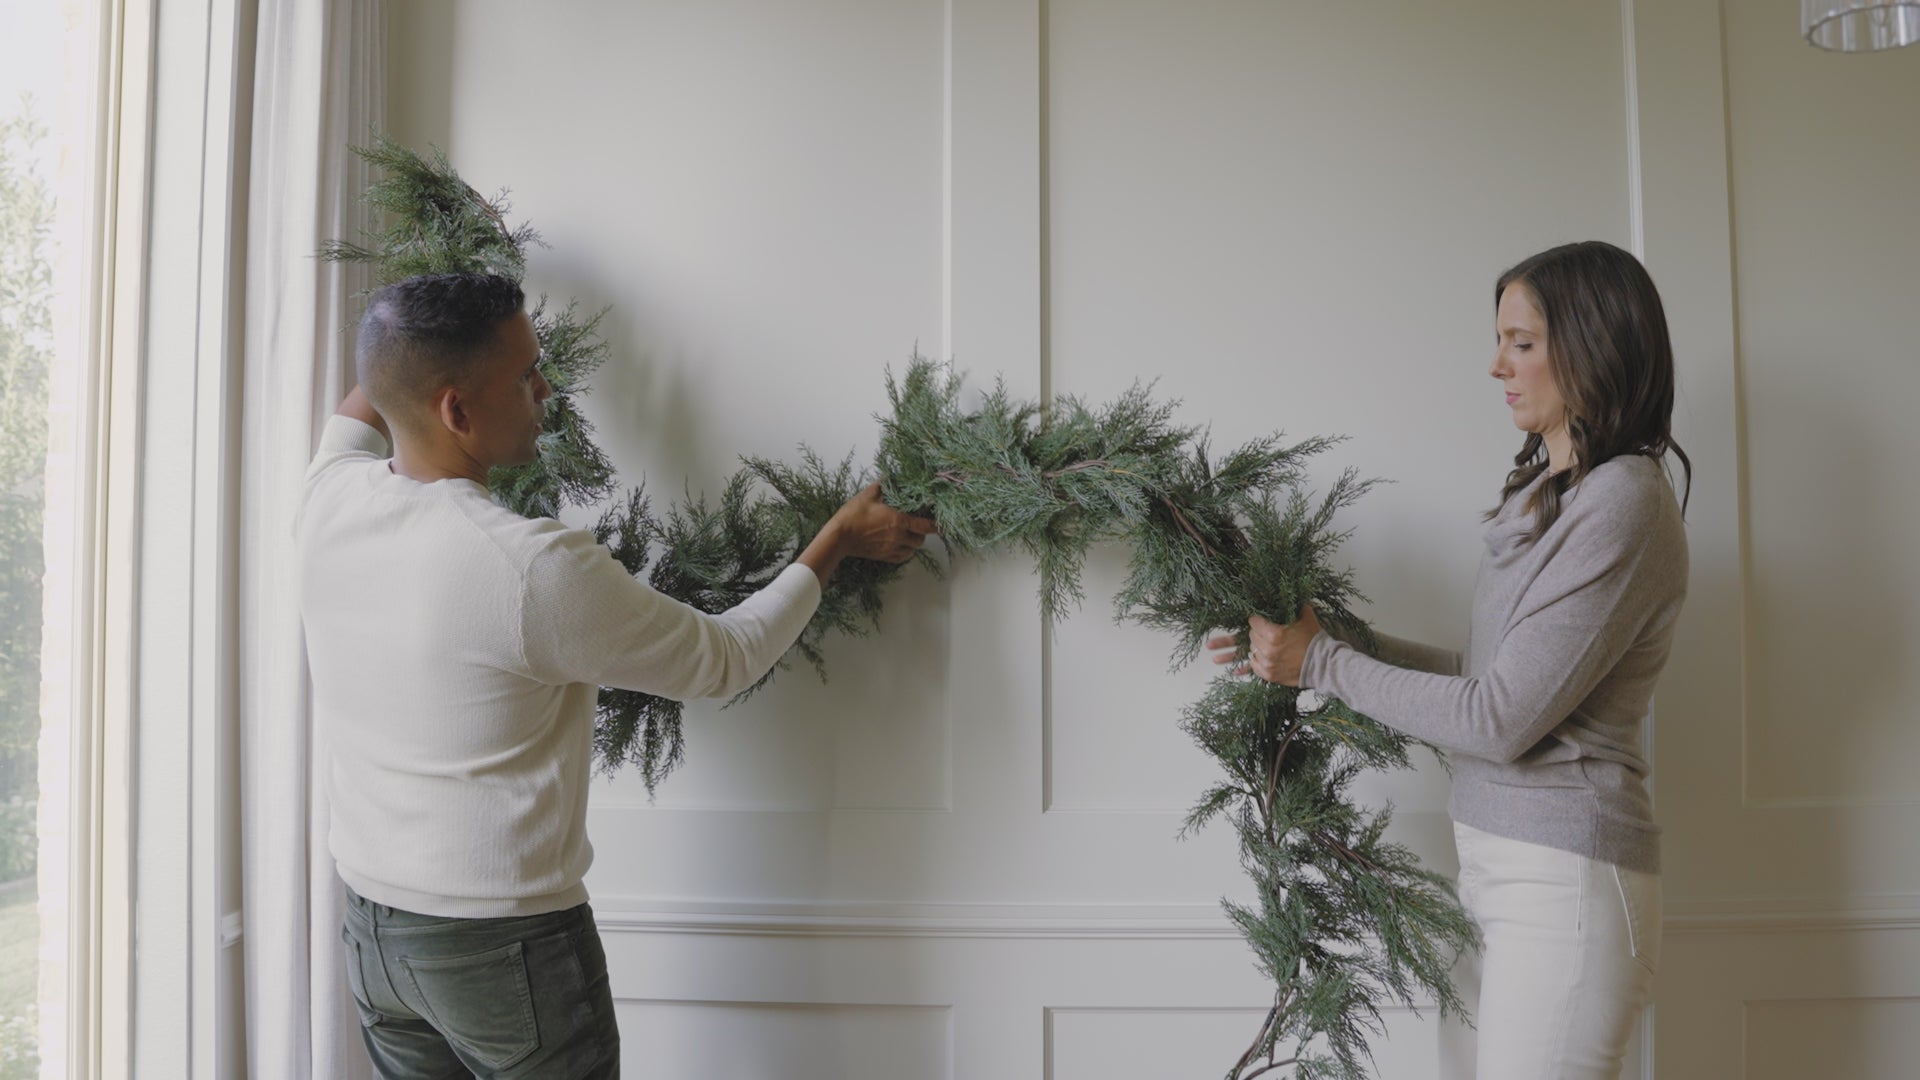 Video of Wreath and Garland